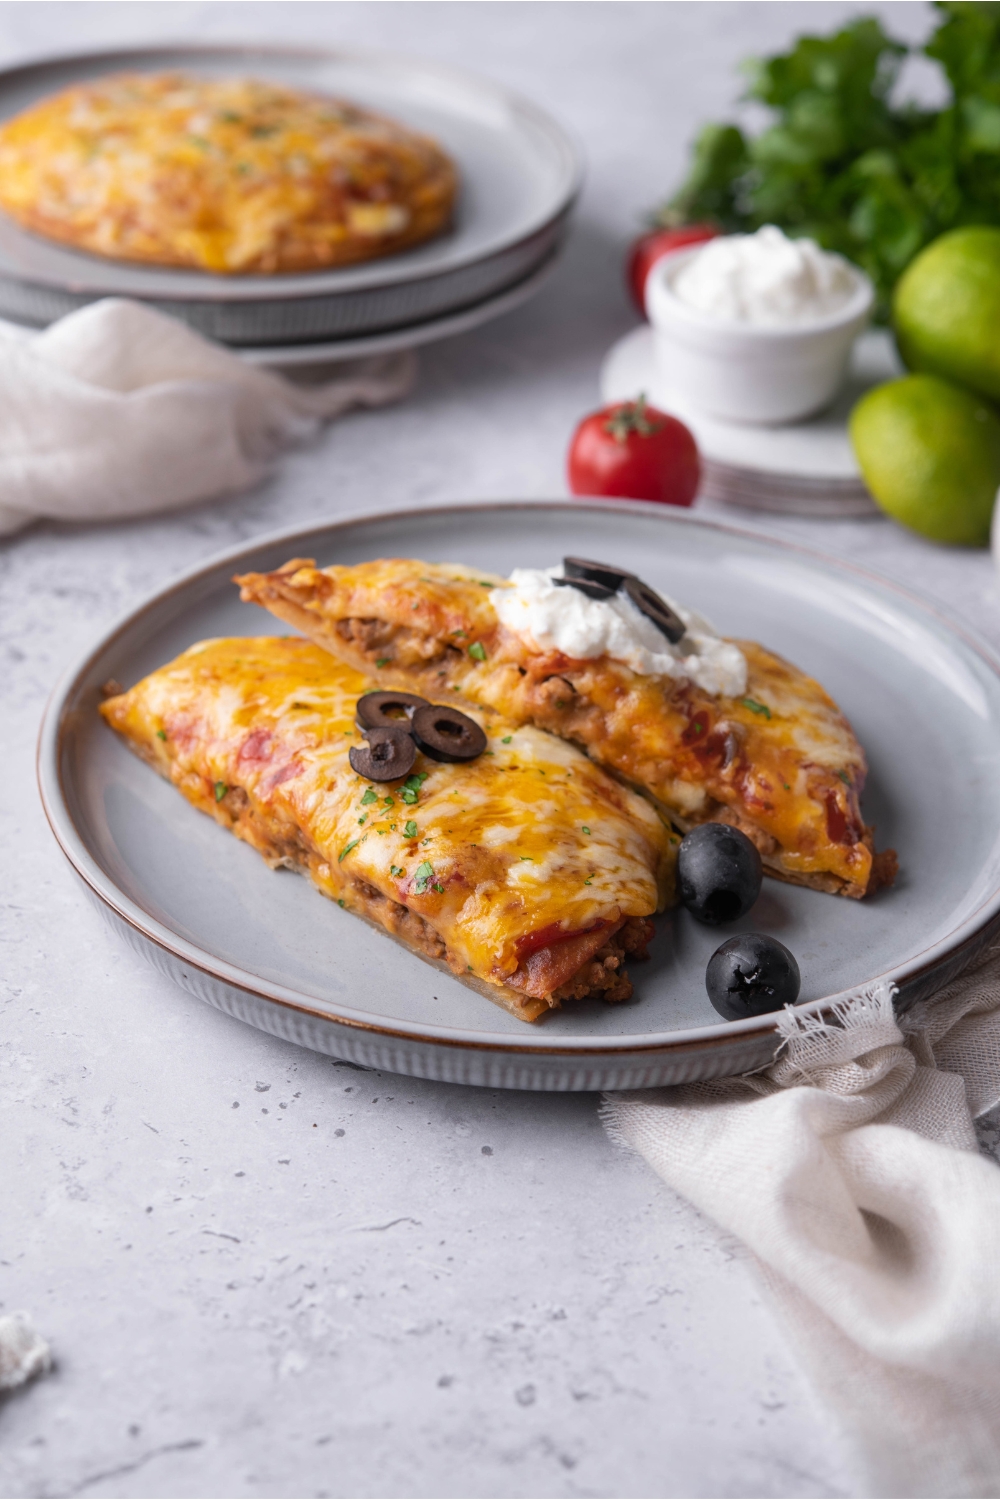 A blue plate with a Taco Bell Mexican pizza that has been cut in half, with one half layered on top of the other. The top slice of pizza is topped with sour cream and black olives.